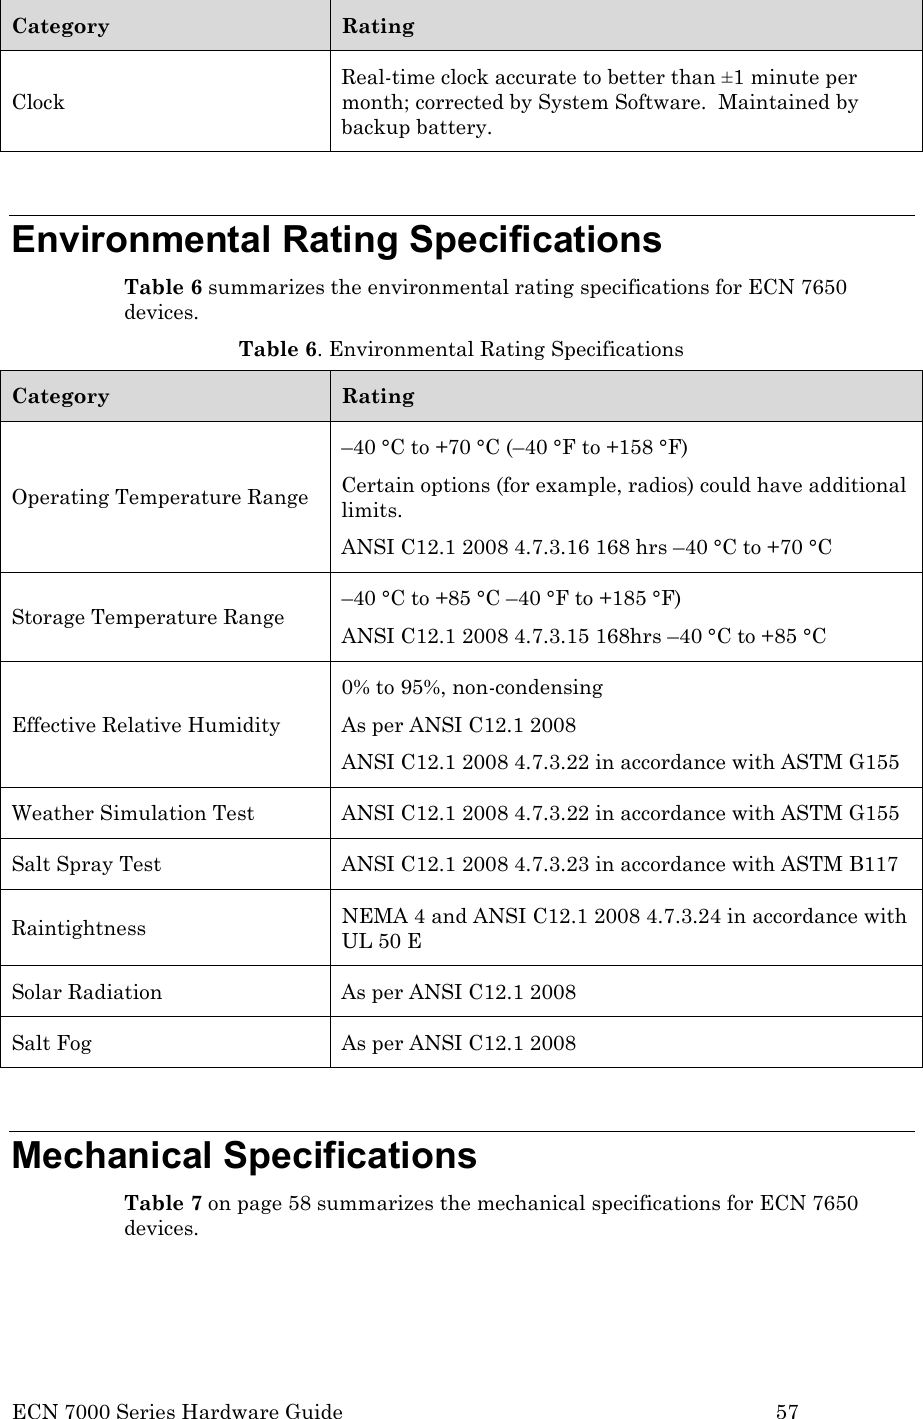  ECN 7000 Series Hardware Guide        57 Category Rating Clock Real-time clock accurate to better than ±1 minute per month; corrected by System Software.  Maintained by backup battery.  Environmental Rating Specifications Table 6 summarizes the environmental rating specifications for ECN 7650 devices. Table 6. Environmental Rating Specifications Category Rating Operating Temperature Range –40 °C to +70 °C (–40 °F to +158 °F) Certain options (for example, radios) could have additional limits. ANSI C12.1 2008 4.7.3.16 168 hrs –40 °C to +70 °C  Storage Temperature Range –40 °C to +85 °C –40 °F to +185 °F) ANSI C12.1 2008 4.7.3.15 168hrs –40 °C to +85 °C Effective Relative Humidity 0% to 95%, non-condensing As per ANSI C12.1 2008 ANSI C12.1 2008 4.7.3.22 in accordance with ASTM G155 Weather Simulation Test ANSI C12.1 2008 4.7.3.22 in accordance with ASTM G155 Salt Spray Test ANSI C12.1 2008 4.7.3.23 in accordance with ASTM B117 Raintightness NEMA 4 and ANSI C12.1 2008 4.7.3.24 in accordance with UL 50 E Solar Radiation As per ANSI C12.1 2008 Salt Fog As per ANSI C12.1 2008  Mechanical Specifications Table 7 on page 58 summarizes the mechanical specifications for ECN 7650 devices. 